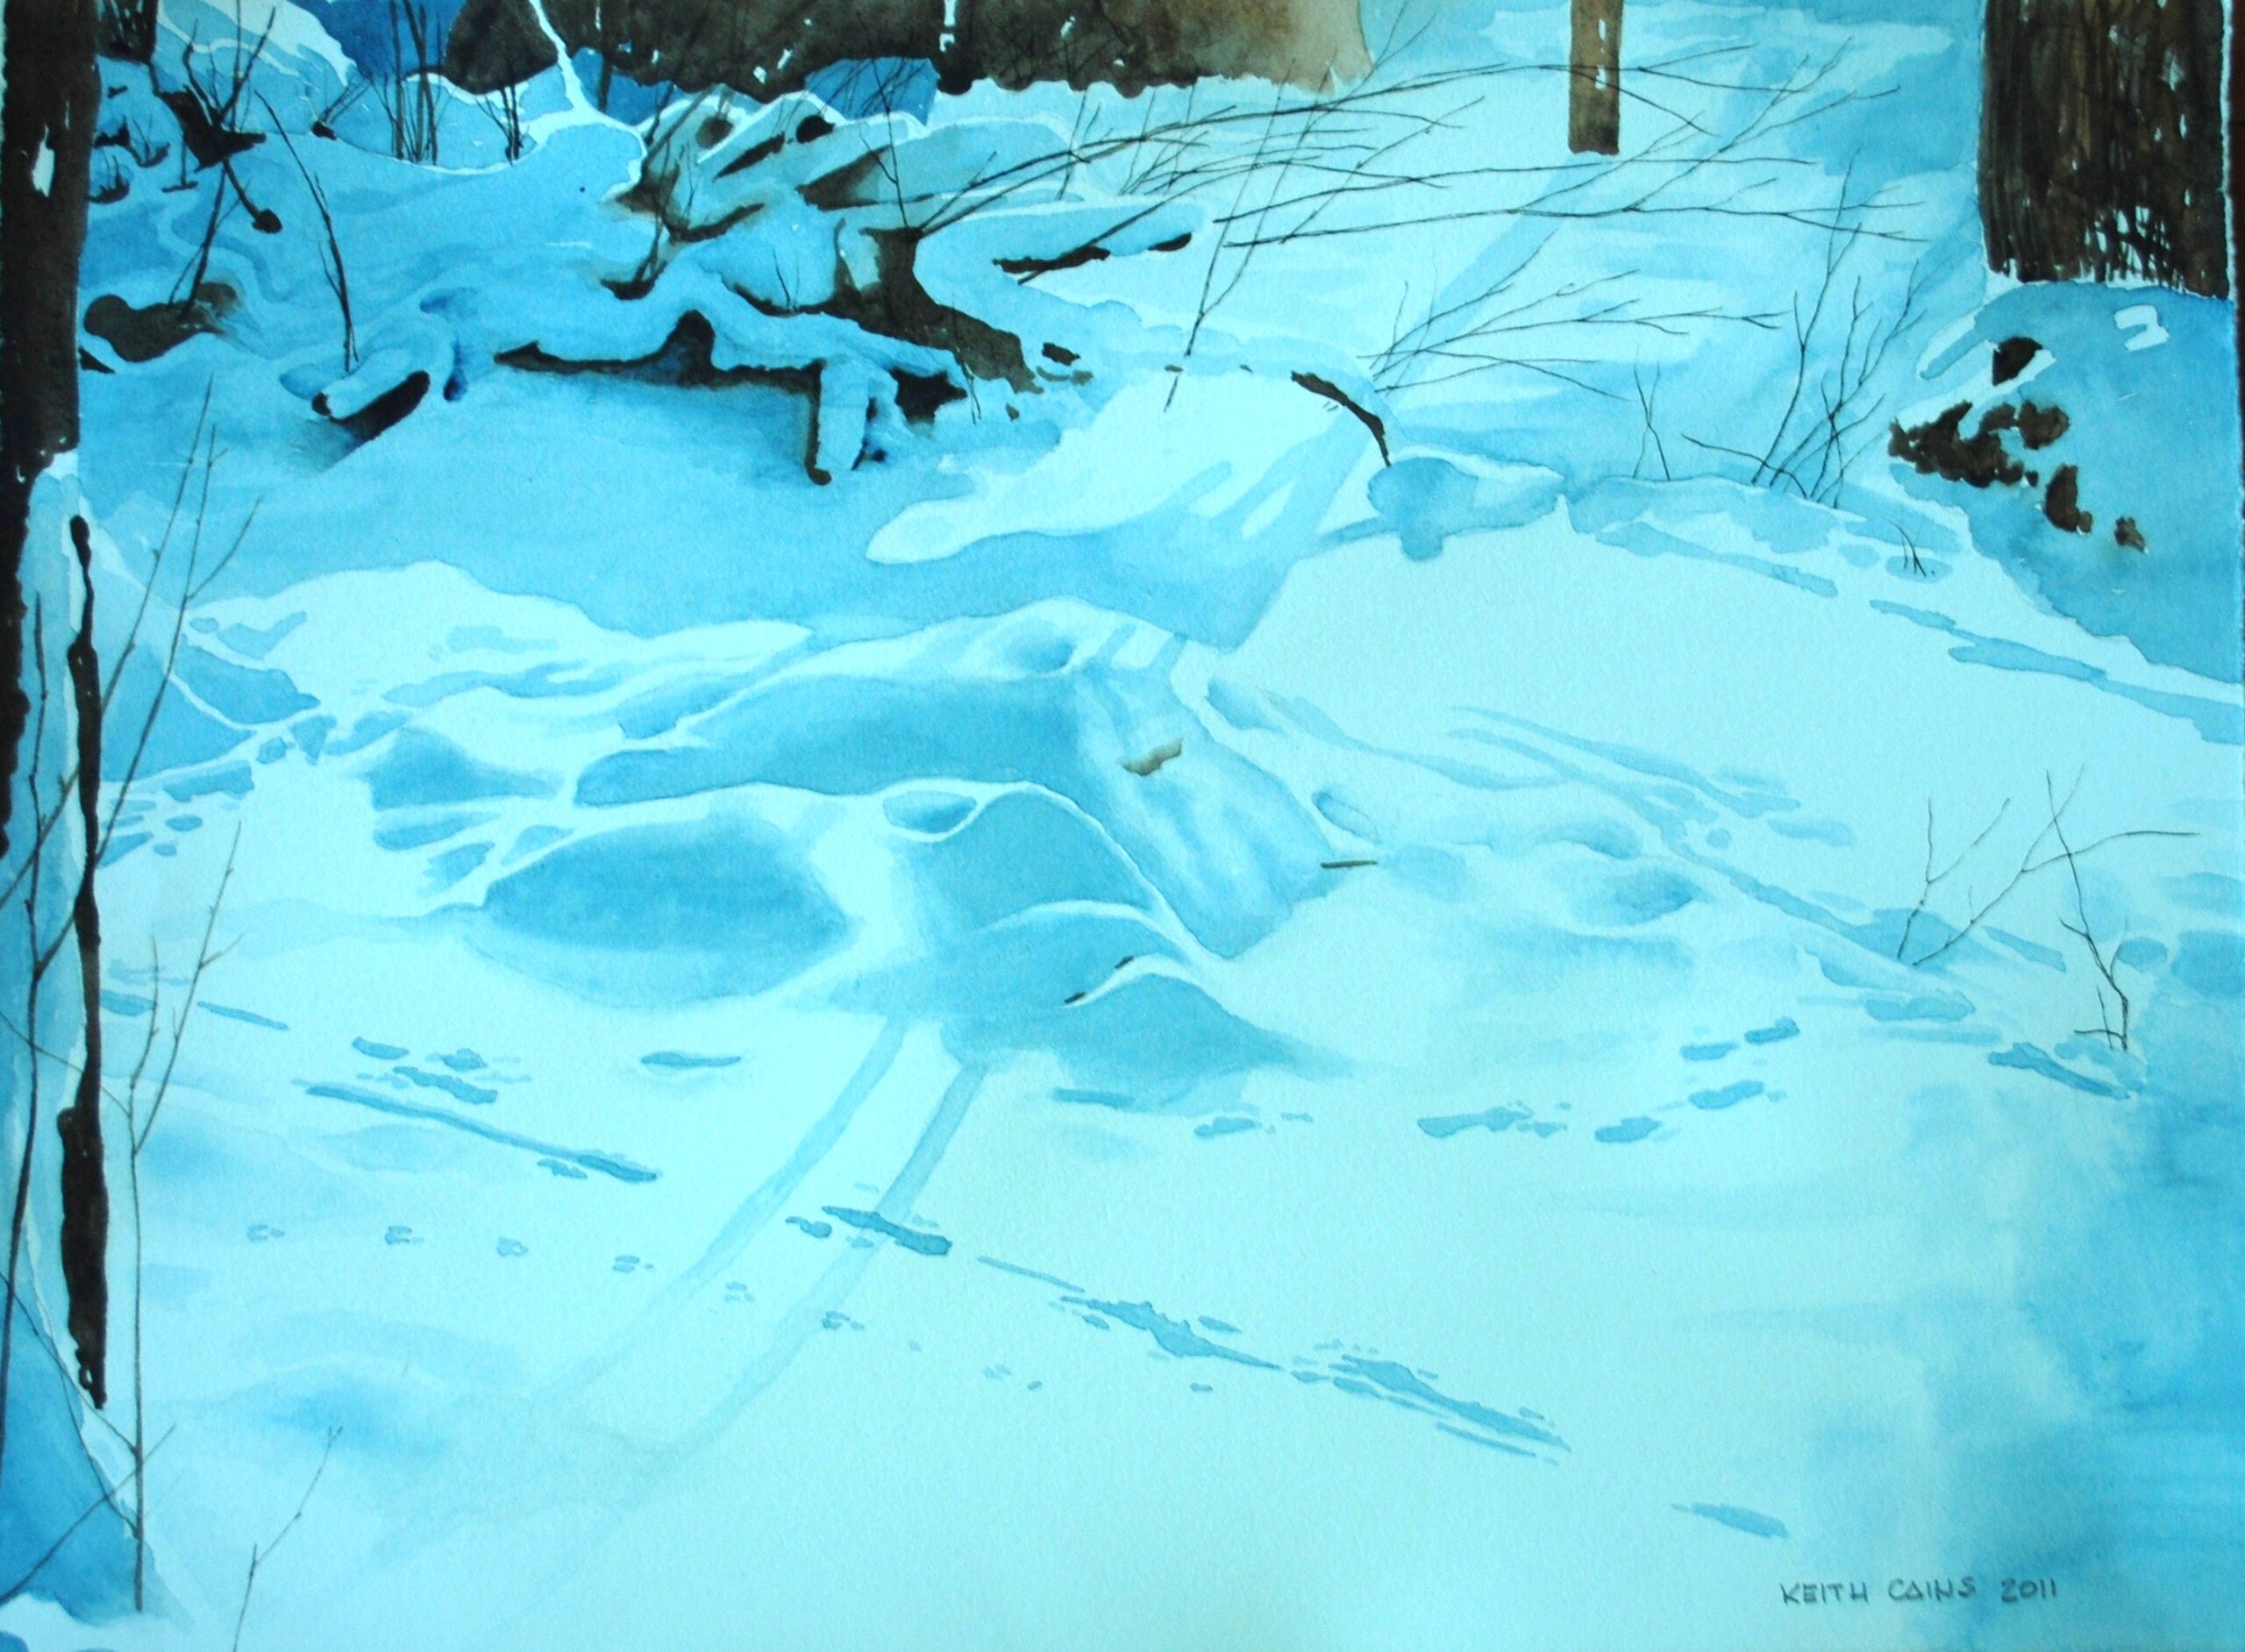 A water colour painting of a yard covered in snow by Keith Cains.